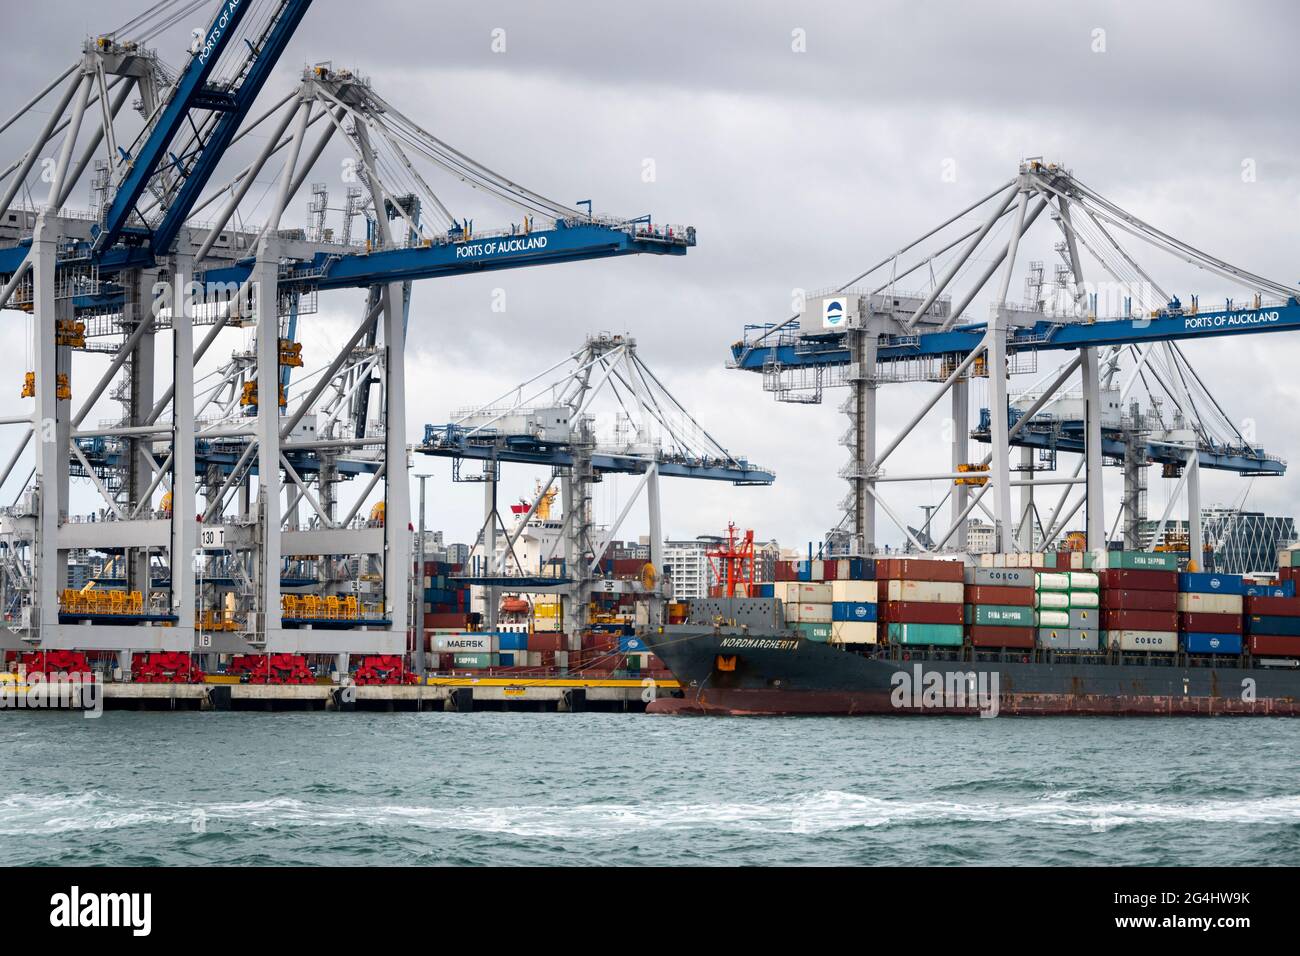 Container ship and cranes in port at Auckland, North Island, New Zealand Stock Photo